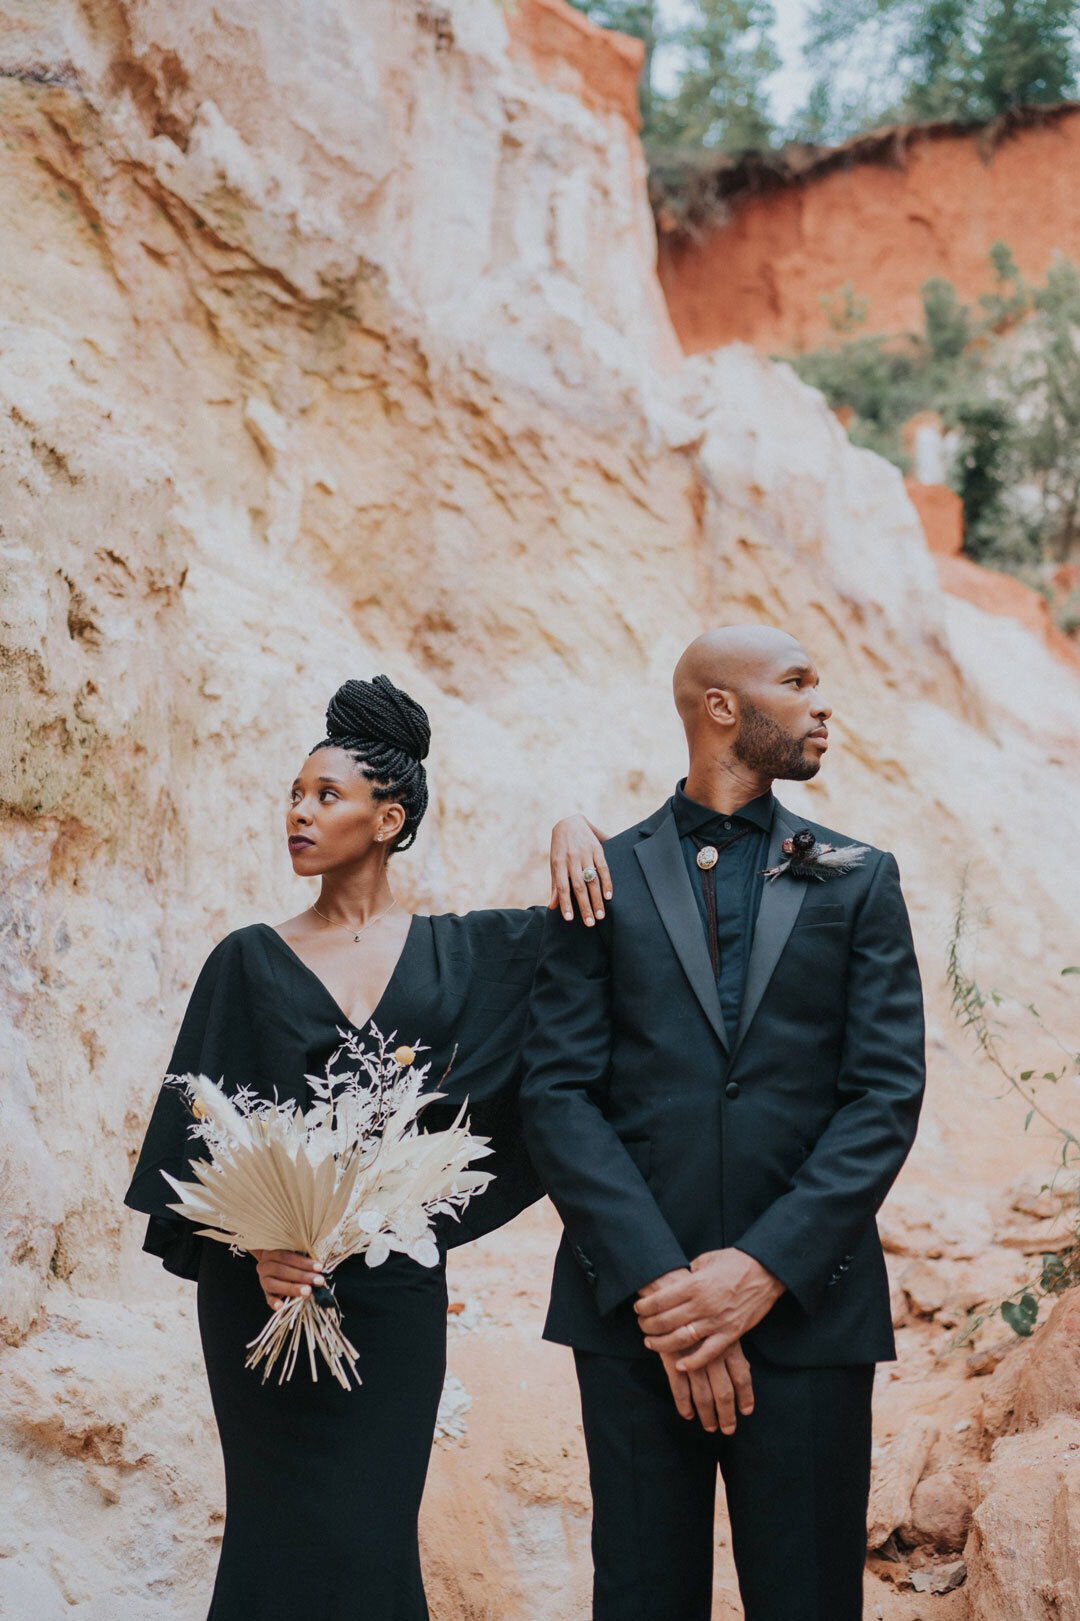 Black couple wearing black outfits holding a white desert bouquet